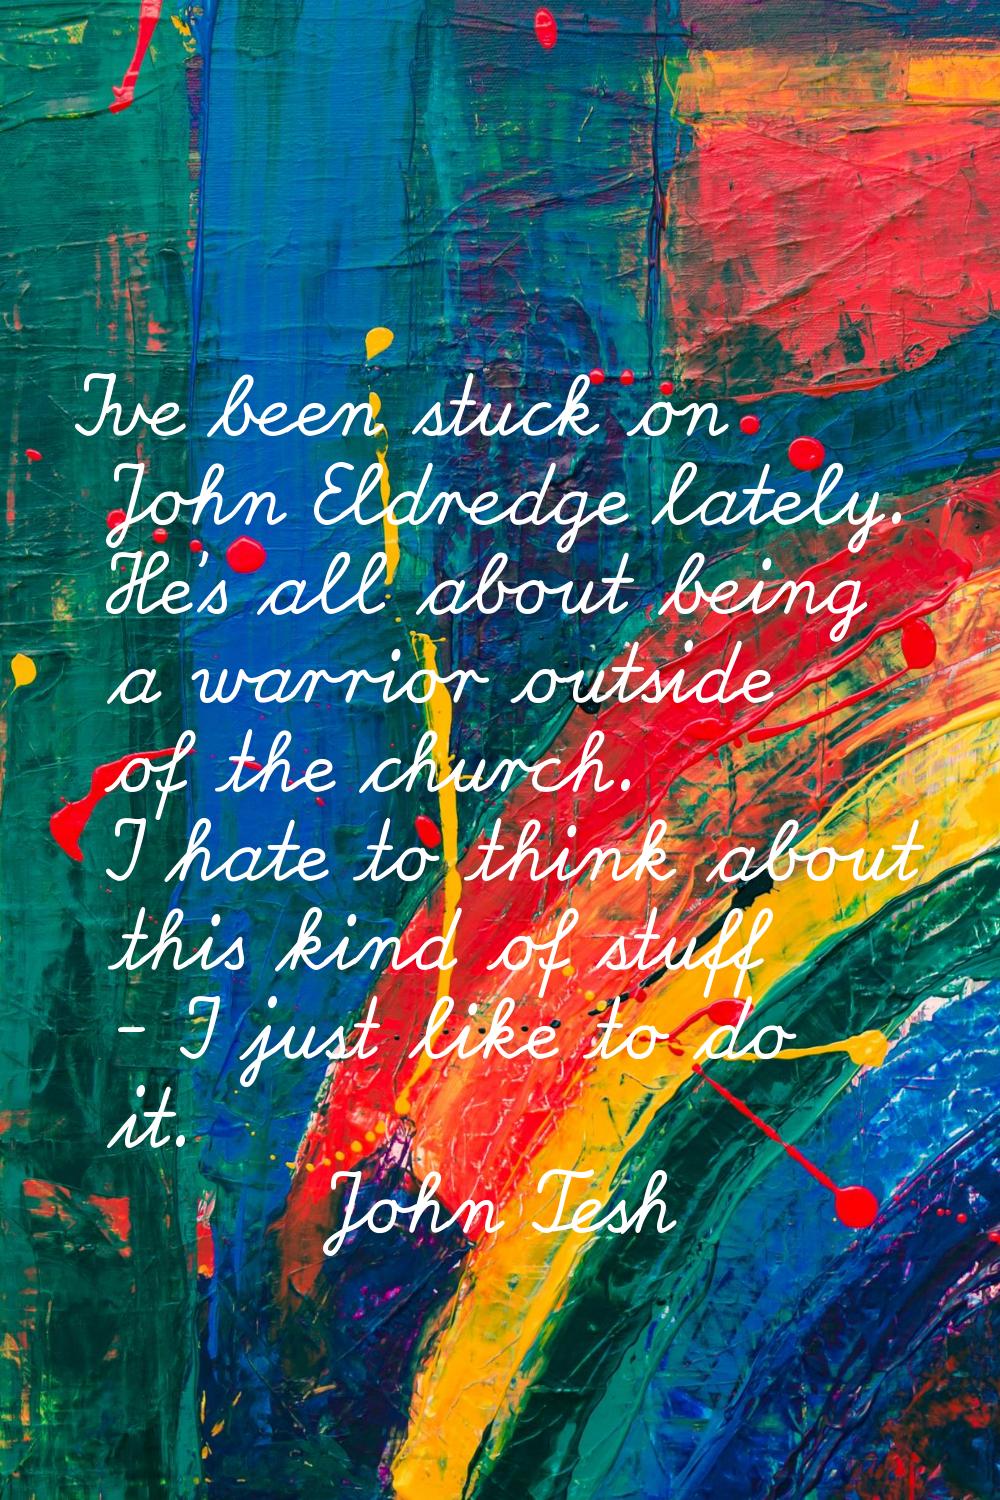 I've been stuck on John Eldredge lately. He's all about being a warrior outside of the church. I ha